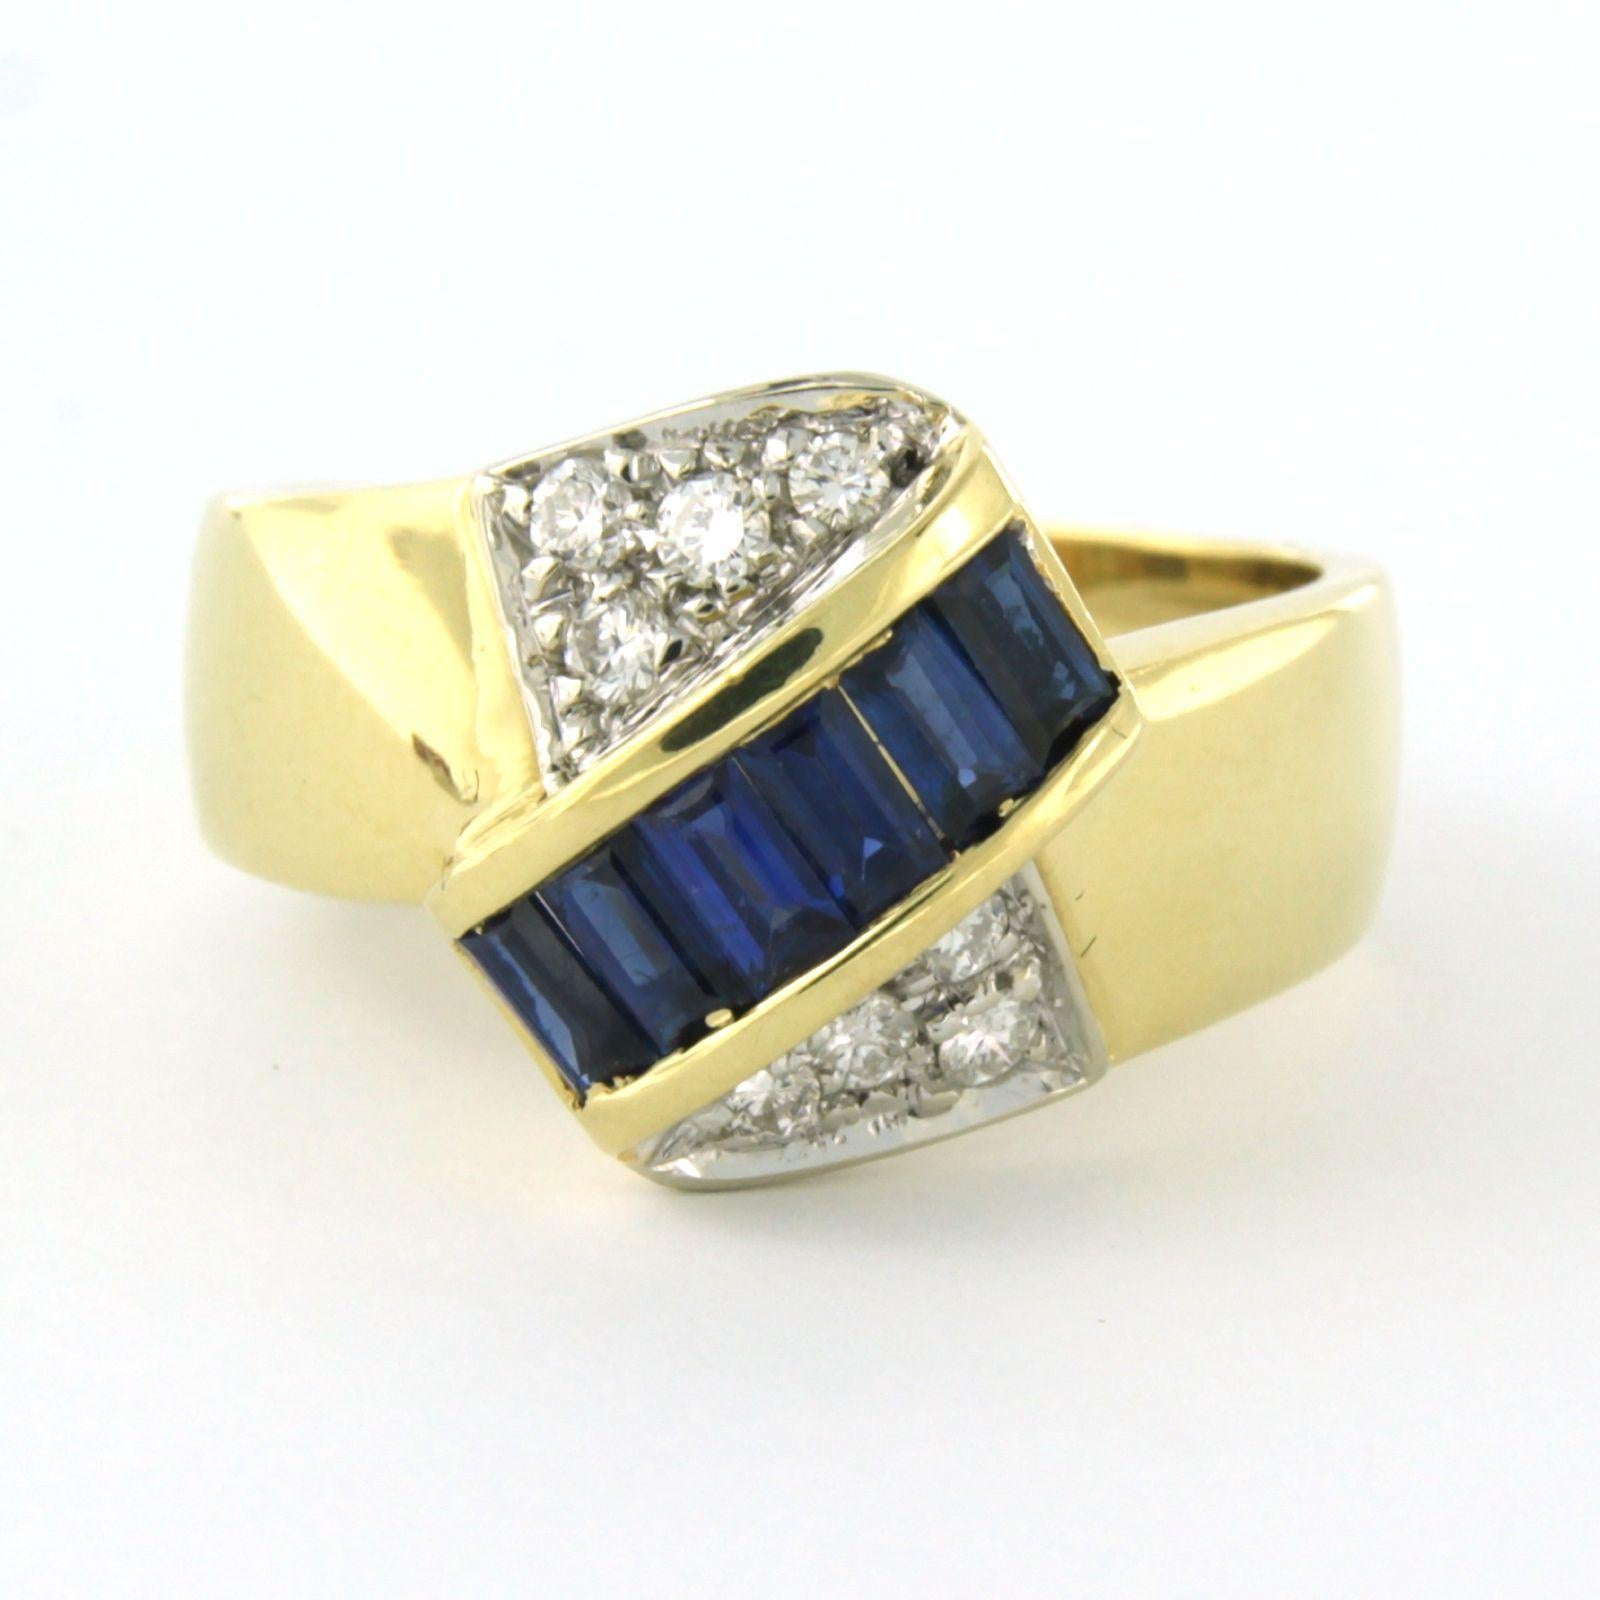 LEO PIZZO - 18 kt bicolor gold ring set with sapphire 1.00 ct in total and brilliant cut diamond 0.35 ct in total - F - VS - ring size U.S. 8 - EU. 18(57)

detailed description

the top of the ring is 1.4 cm wide

weight : 6.5 grams

ring size U.S.